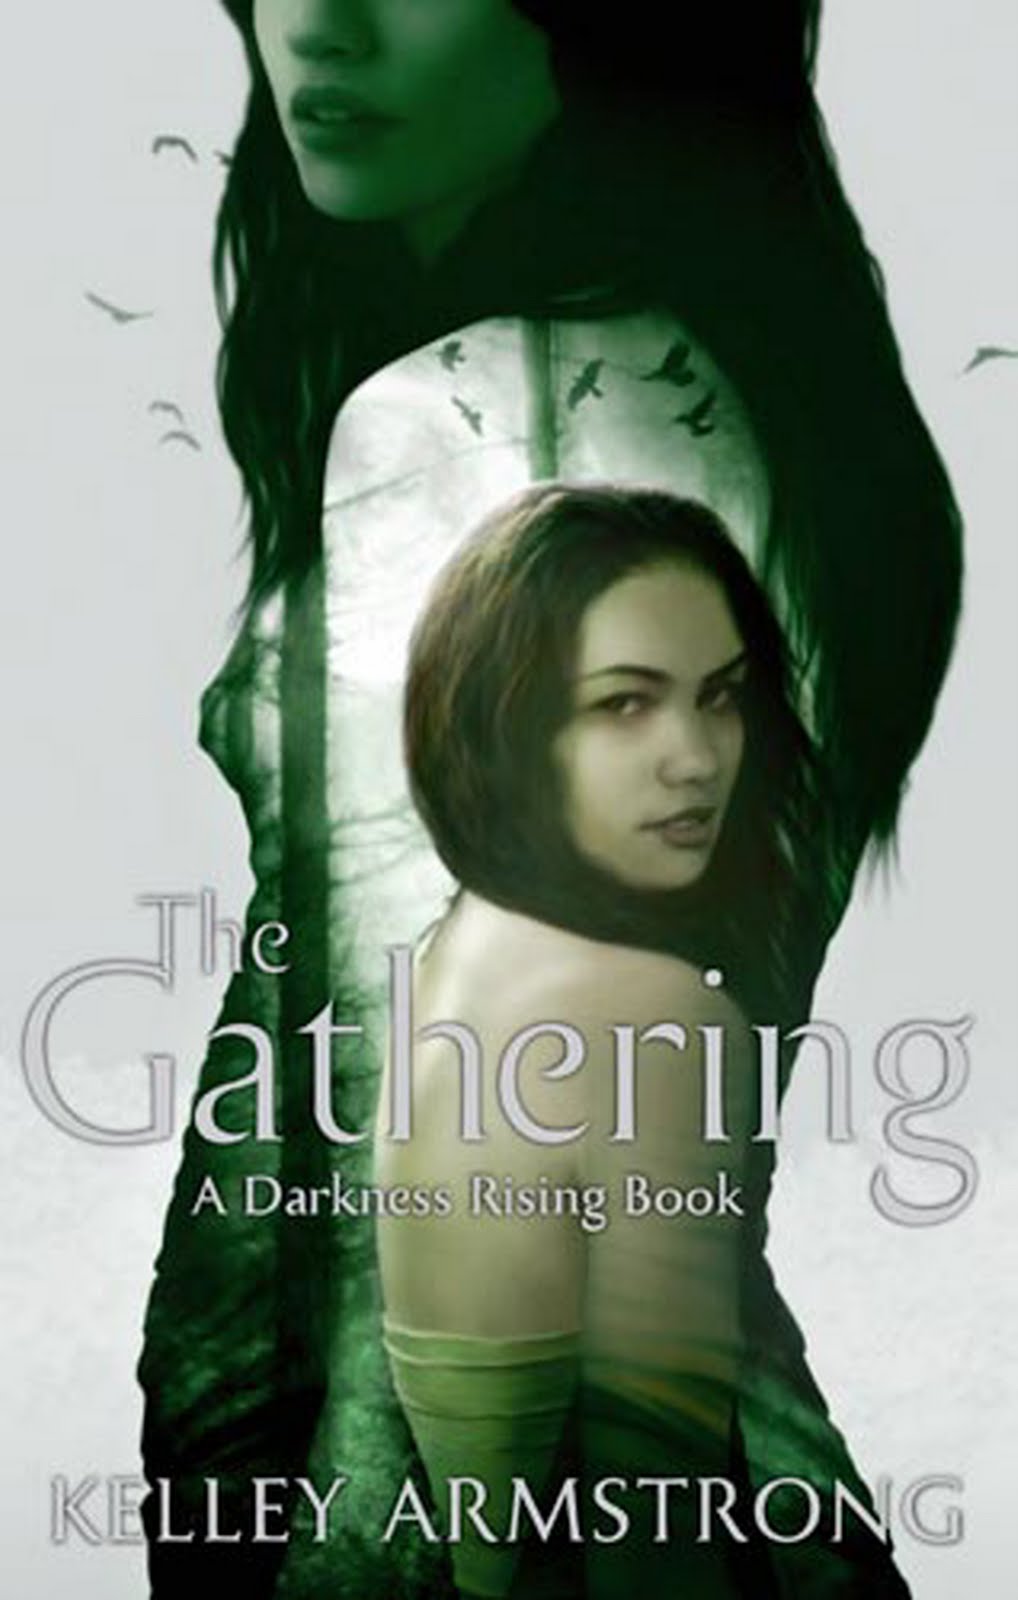 ALPHA reader 'The Gathering' Darkness Rising 1 by Kelley ARMSTRONG